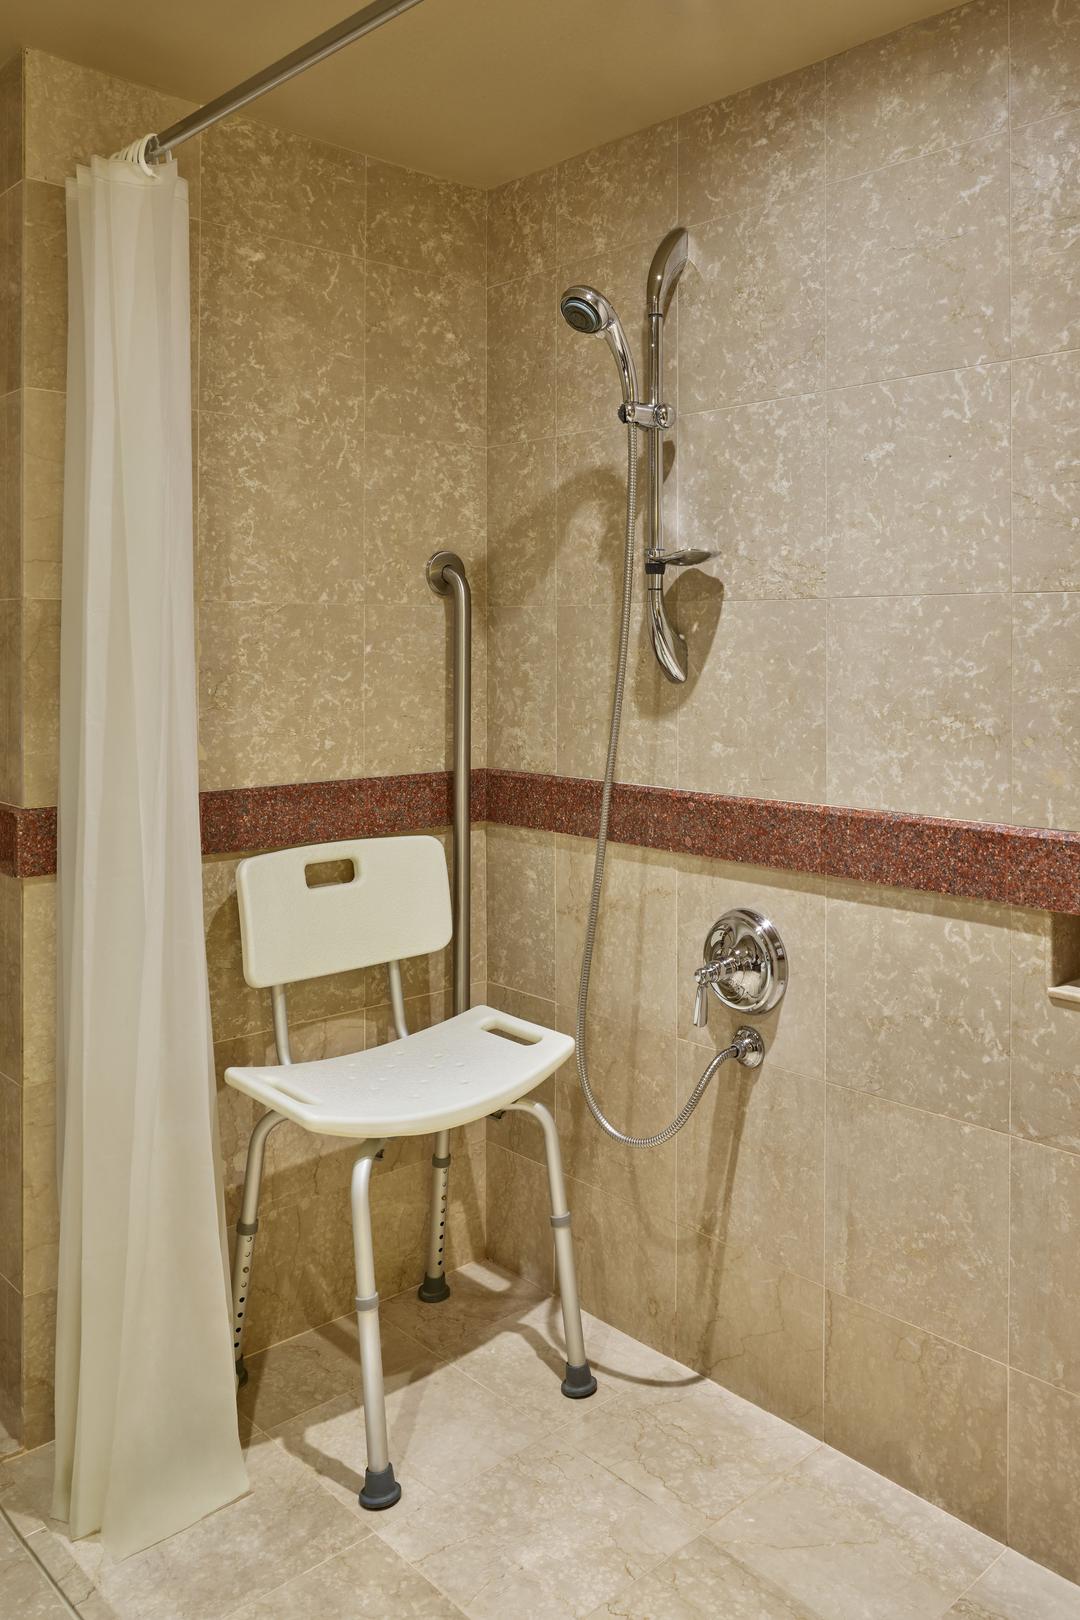 Accessible Guest Room Roll-in Shower